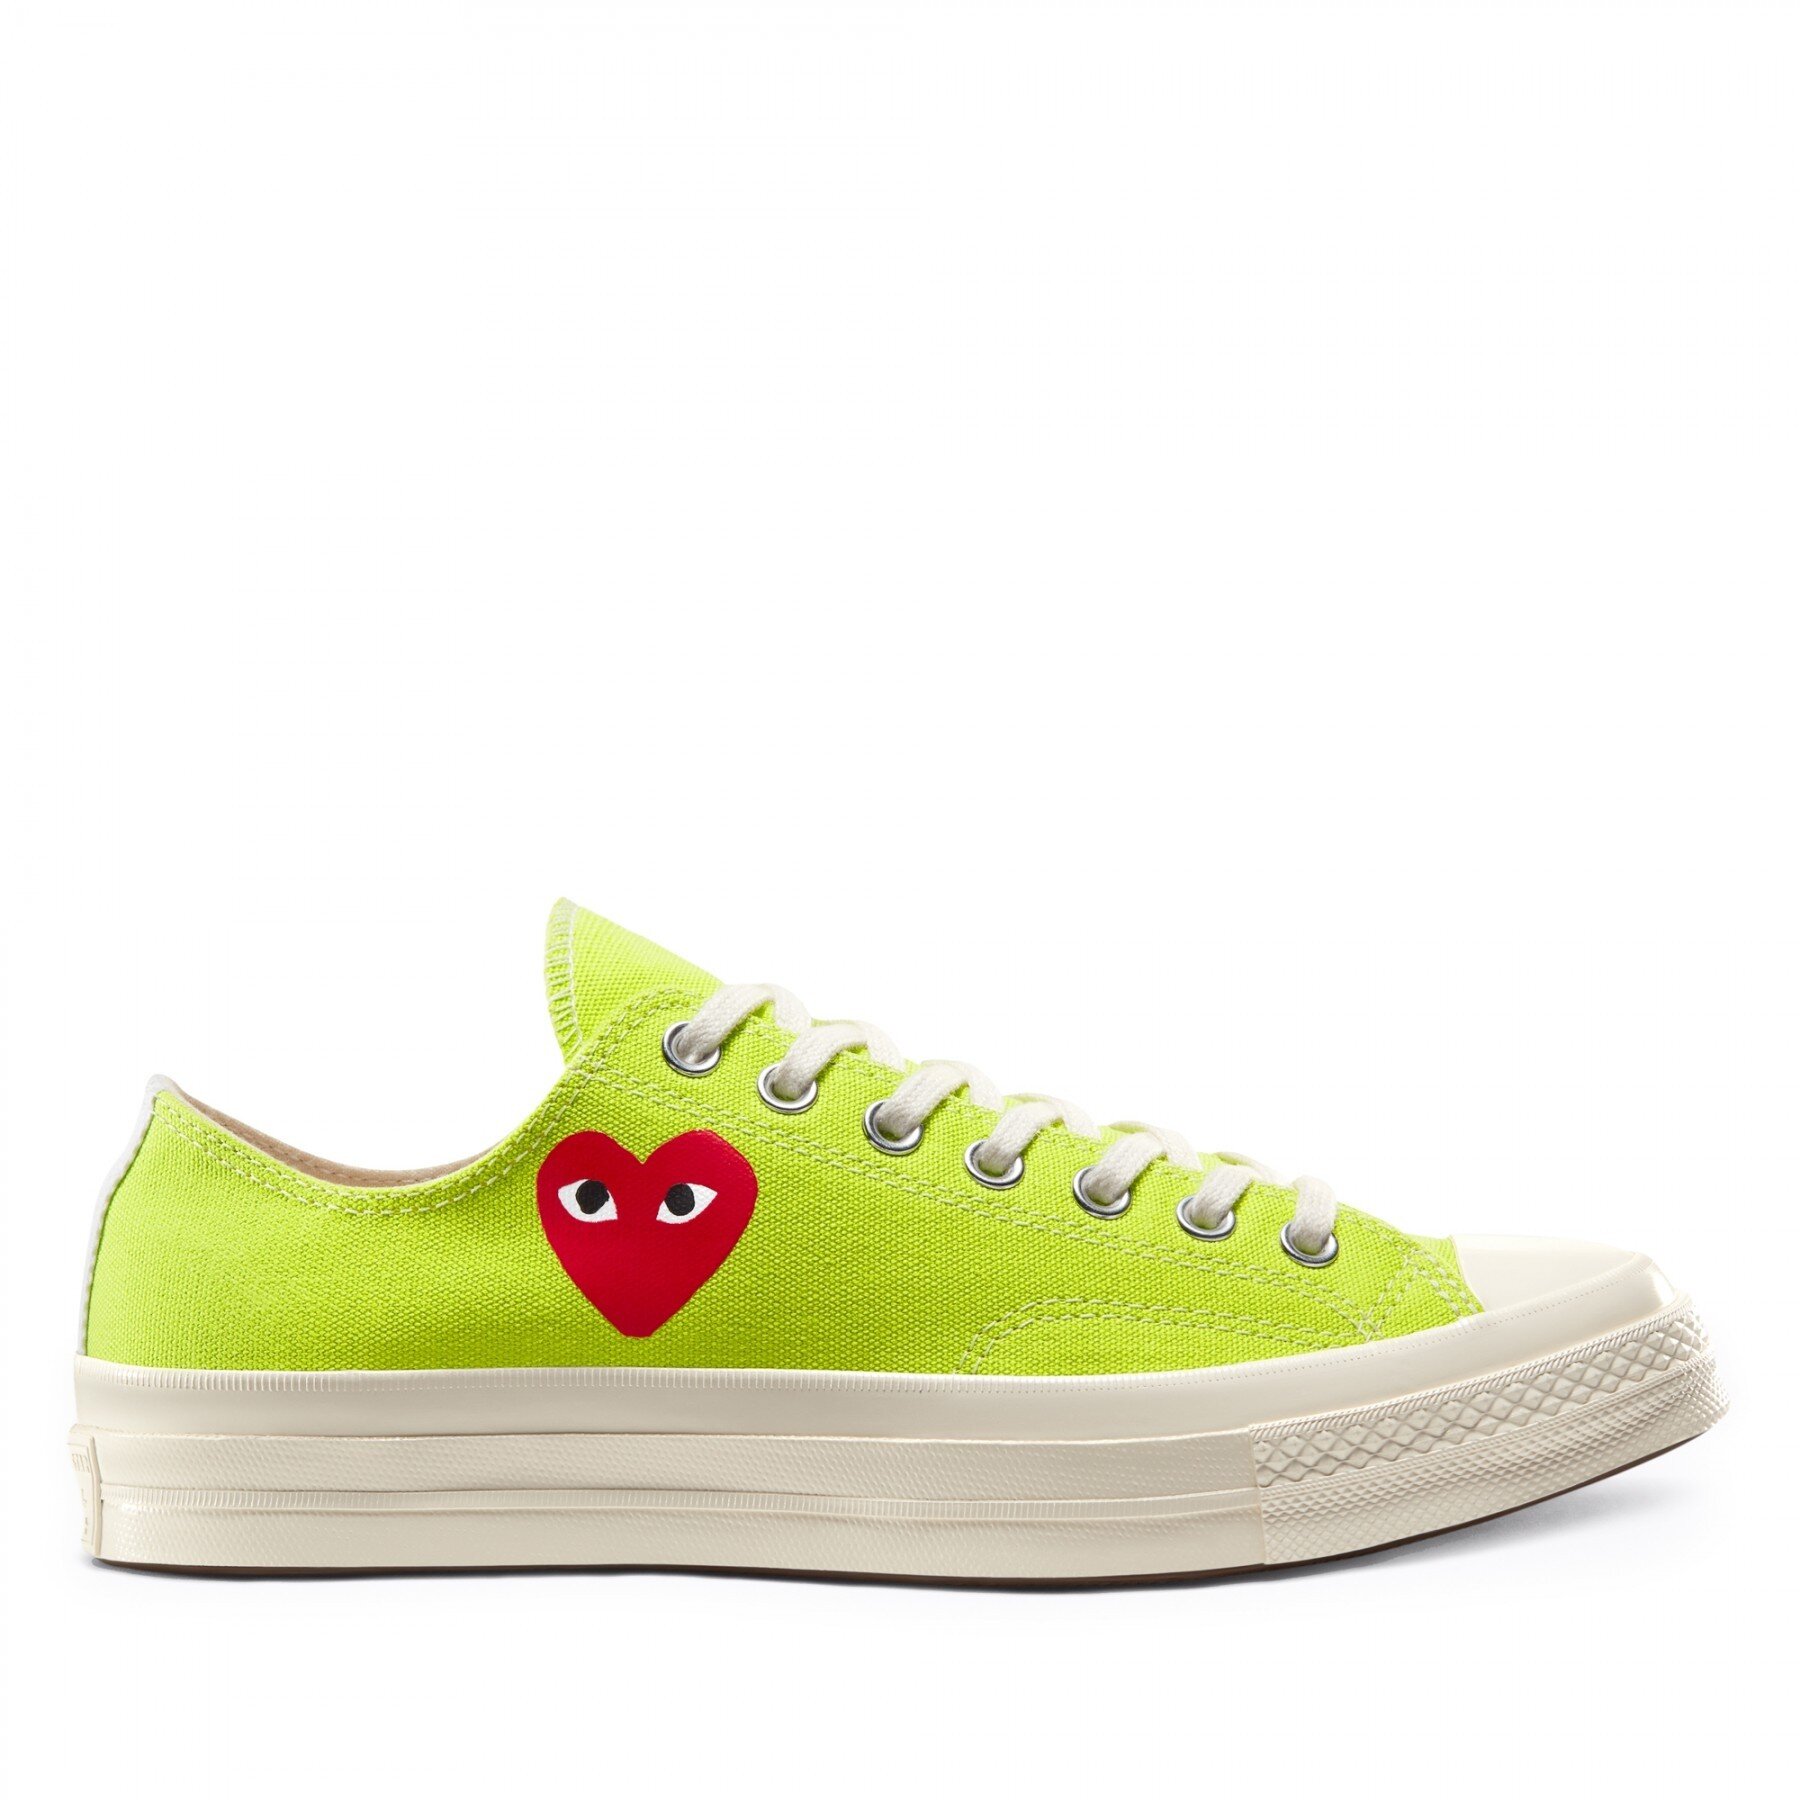 CNK-CDG-CONVERSE-LIME-LO.jpg